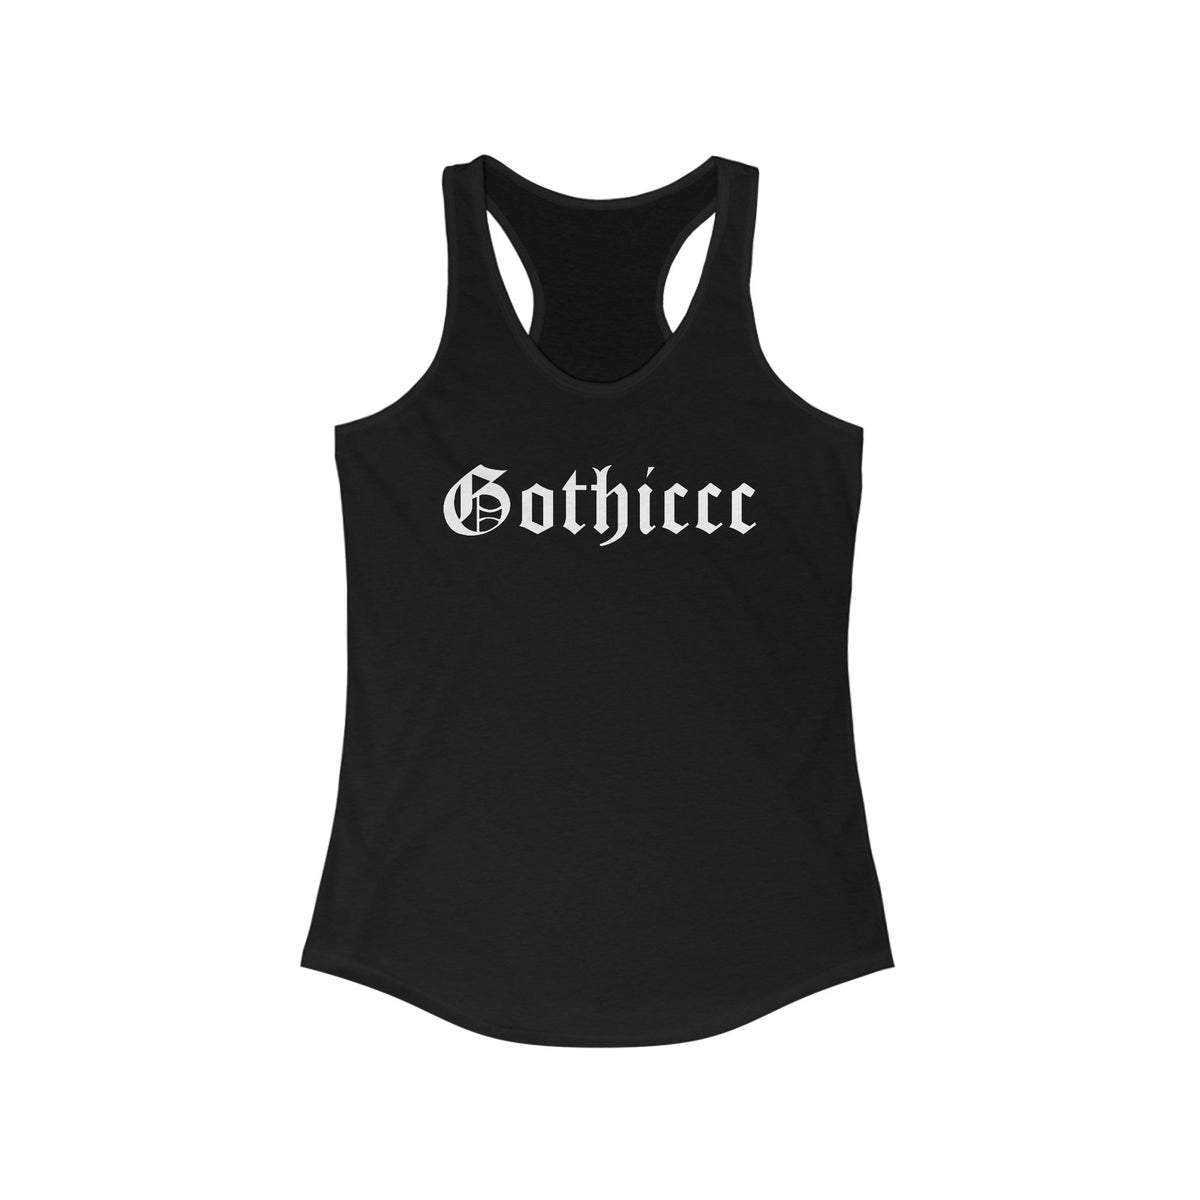 Gothiccc Women's Racerback Tank - Goth Cloth Co.Tank Top25946090036619917871